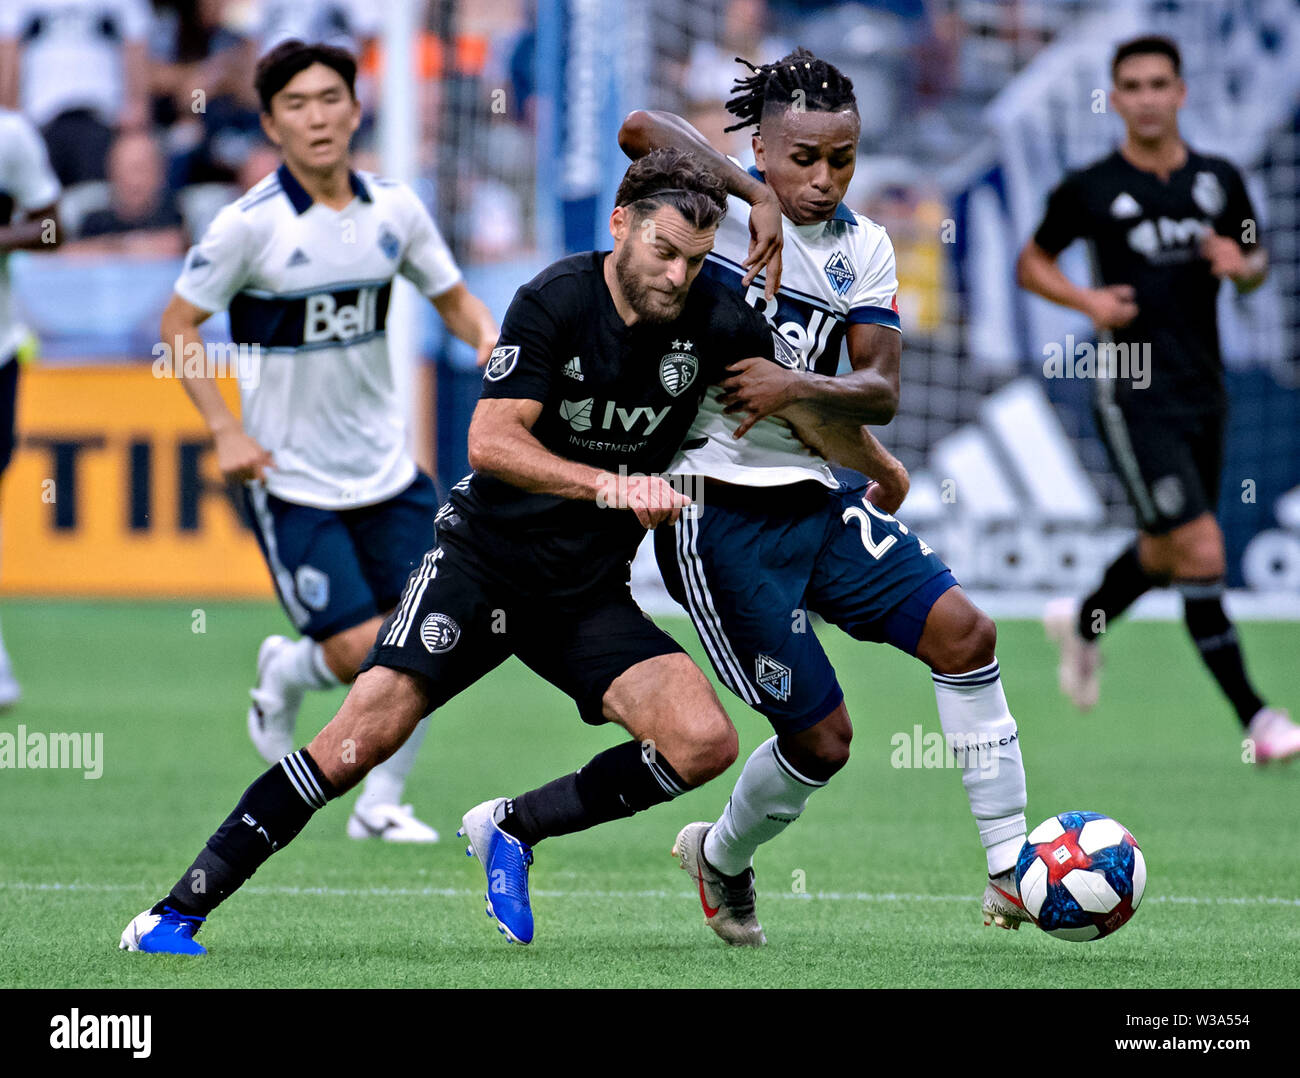 Vancouver, Canada. 14th July, 2019. Sporting Kansas City's Graham Zusi (L) vies with Vancouver Whitecaps FC's Yordy Reyna during the MLS regular season soccer match between Vancouver Whitecaps FC and Sporting Kansas City in Vancouver, Canada, July, 13, 2019. Sporting Kansas City won 3-0. Credit: Andrew Soong/Xinhua/Alamy Live News Stock Photo